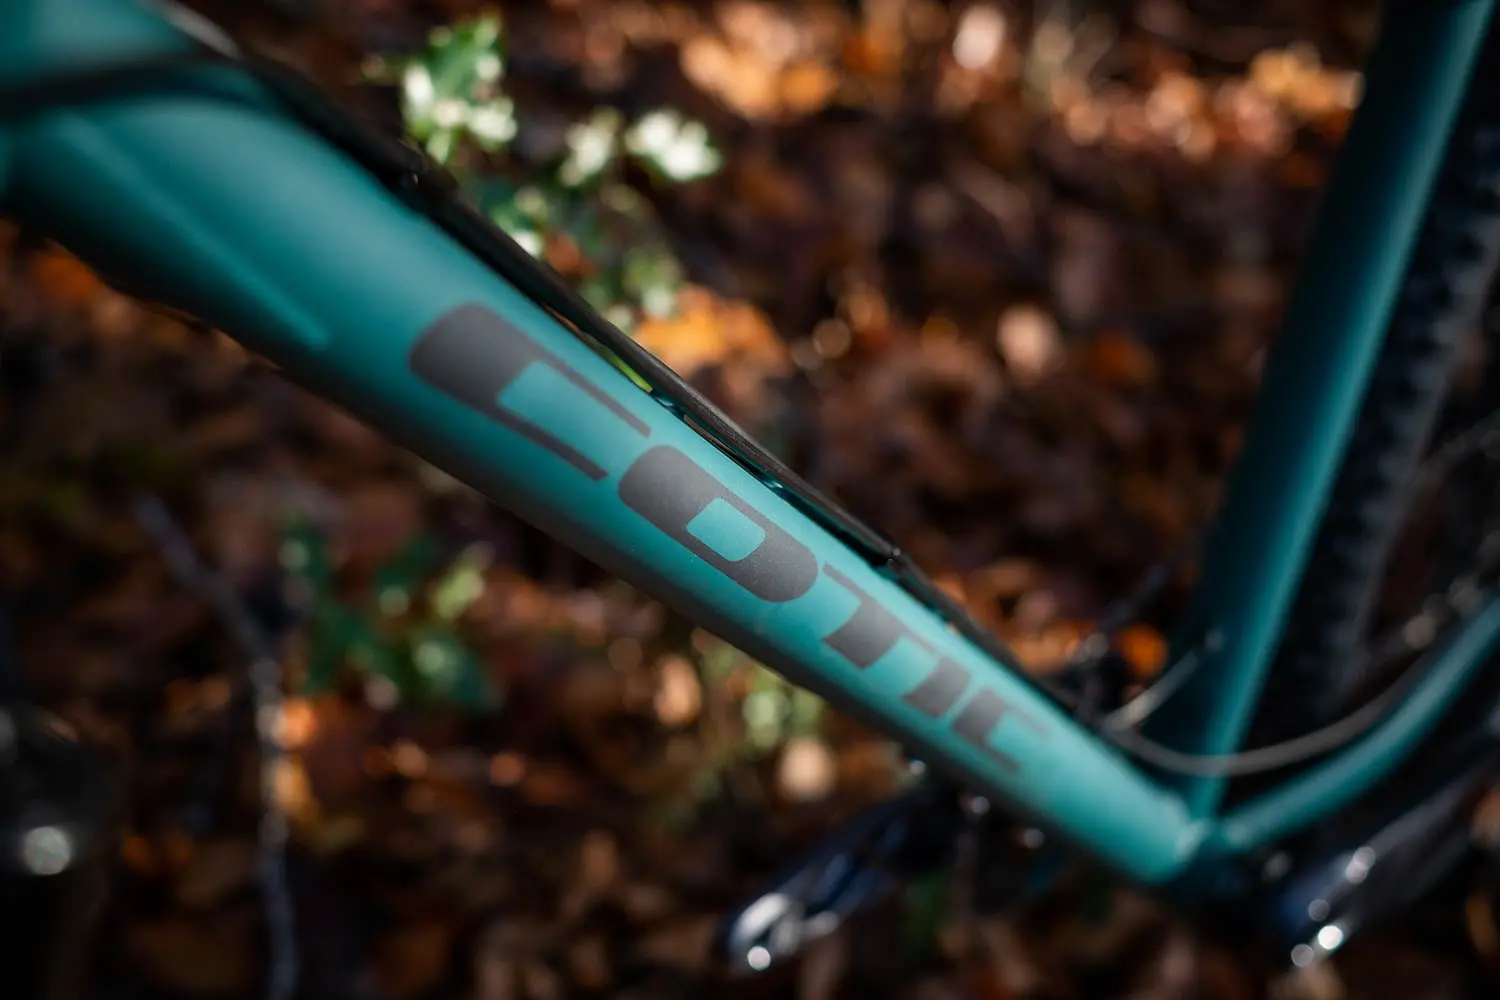 Cotic Solaris in Forest, 853 steel 29er hardtail